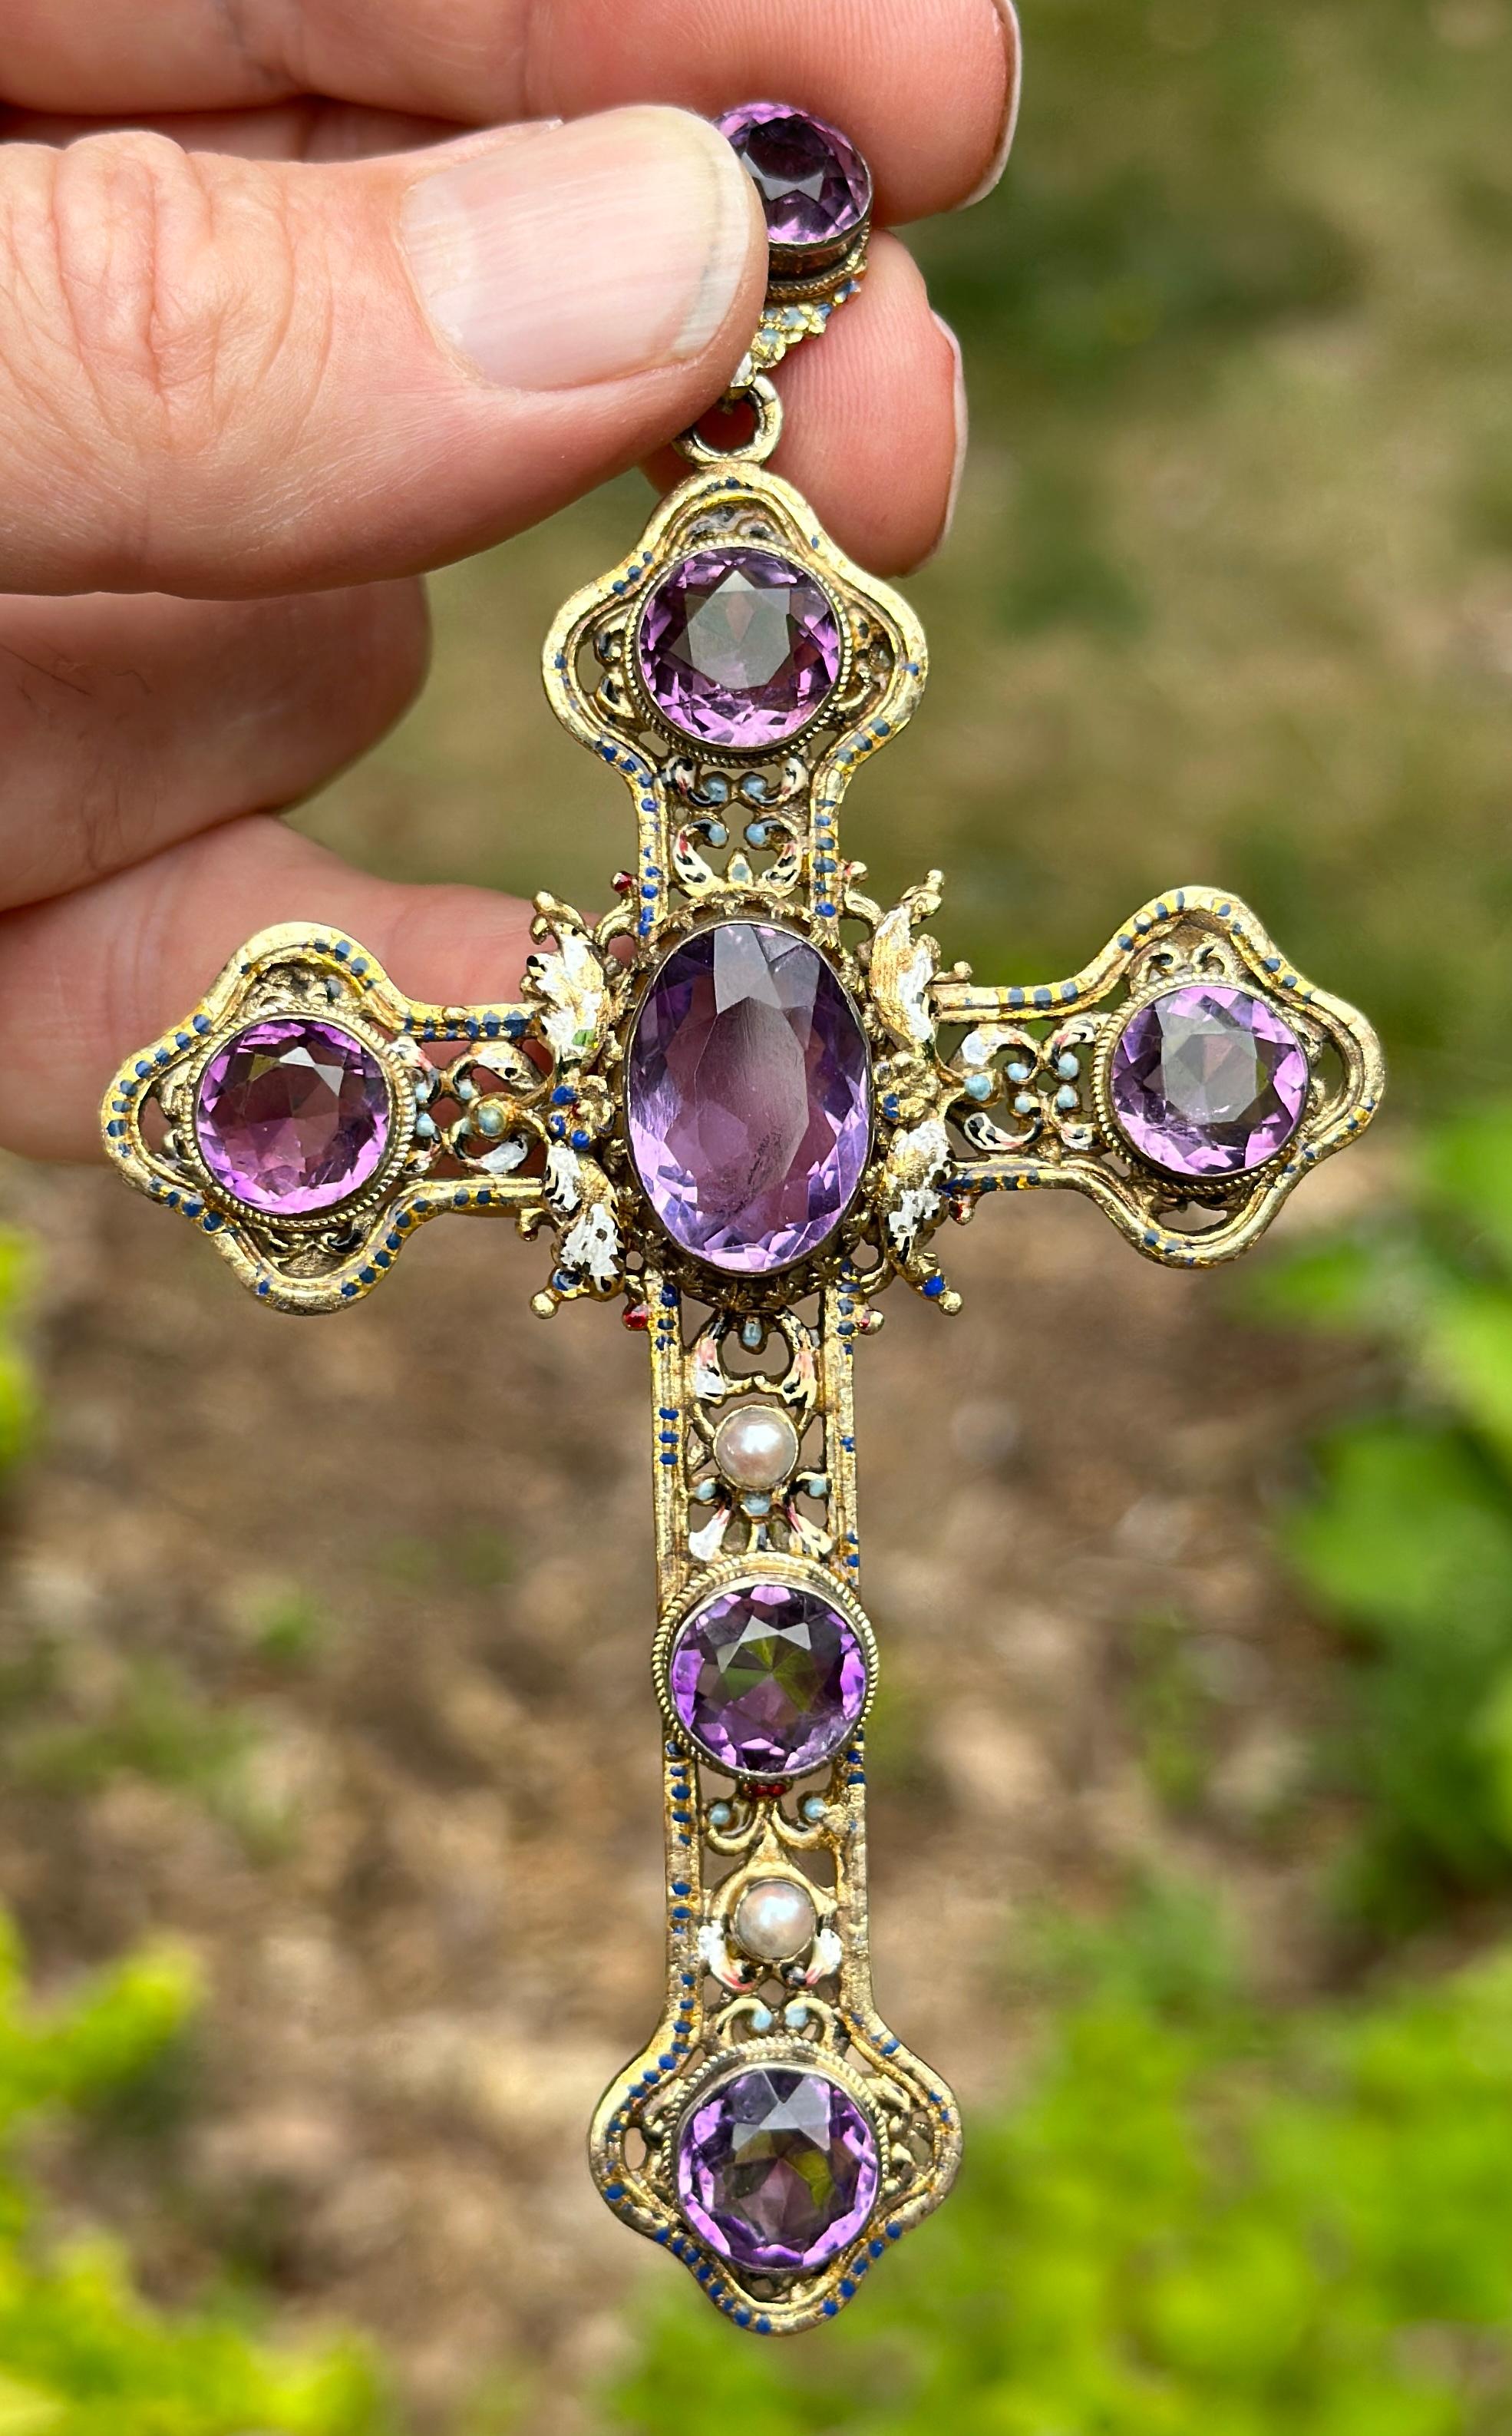 Indulge in a magnificent Museum Quality Austro-Hungarian 20 Carat Amethyst, Enamel and Pearl Cross Pendant of a monumental 4 3/4 inches by 2 3/4 inches.  The cross is in the Renaissance Revival style and dates to circa 1870.  It is hallmarked with